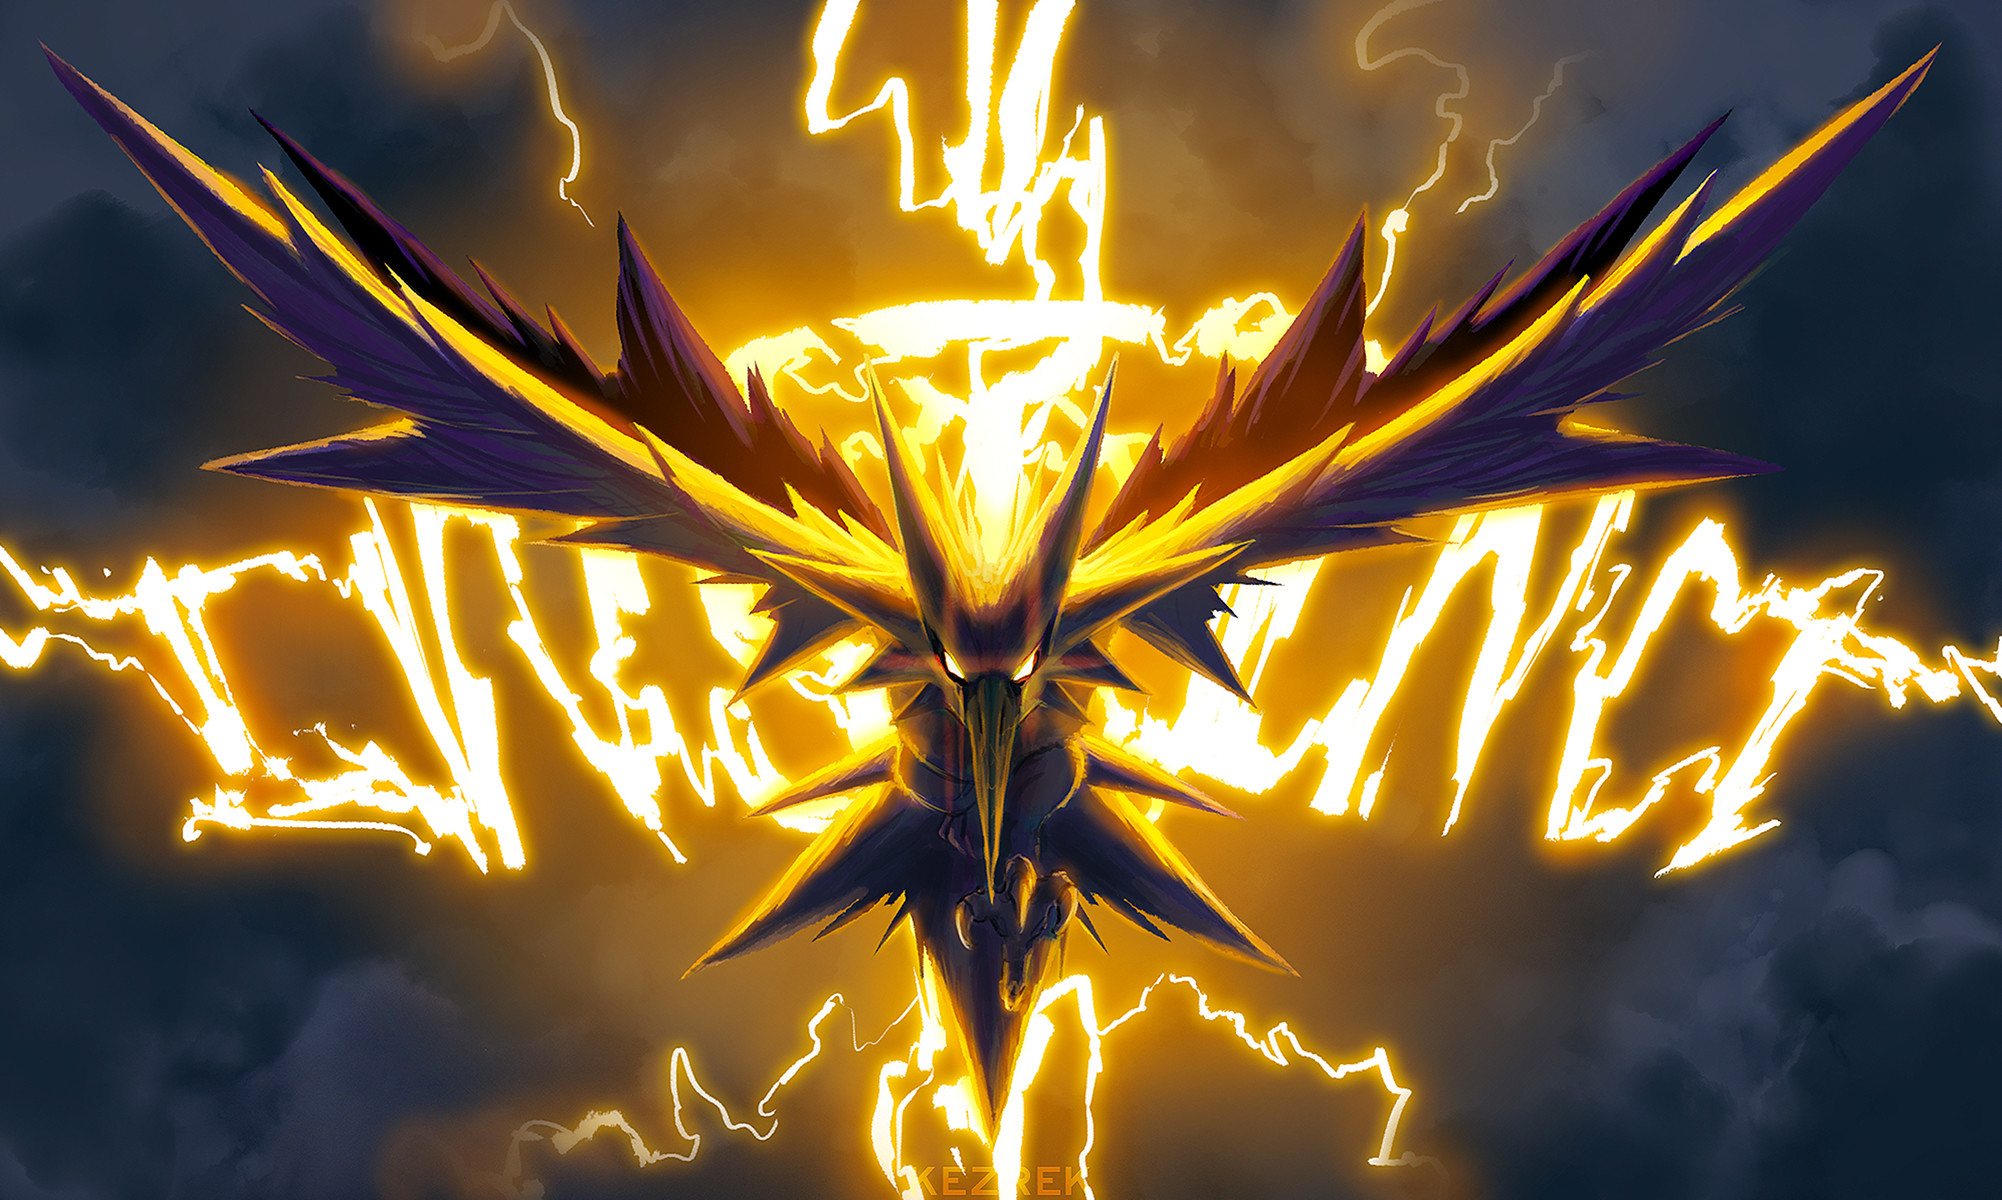 Zapdos Wallpaper The Best Image In